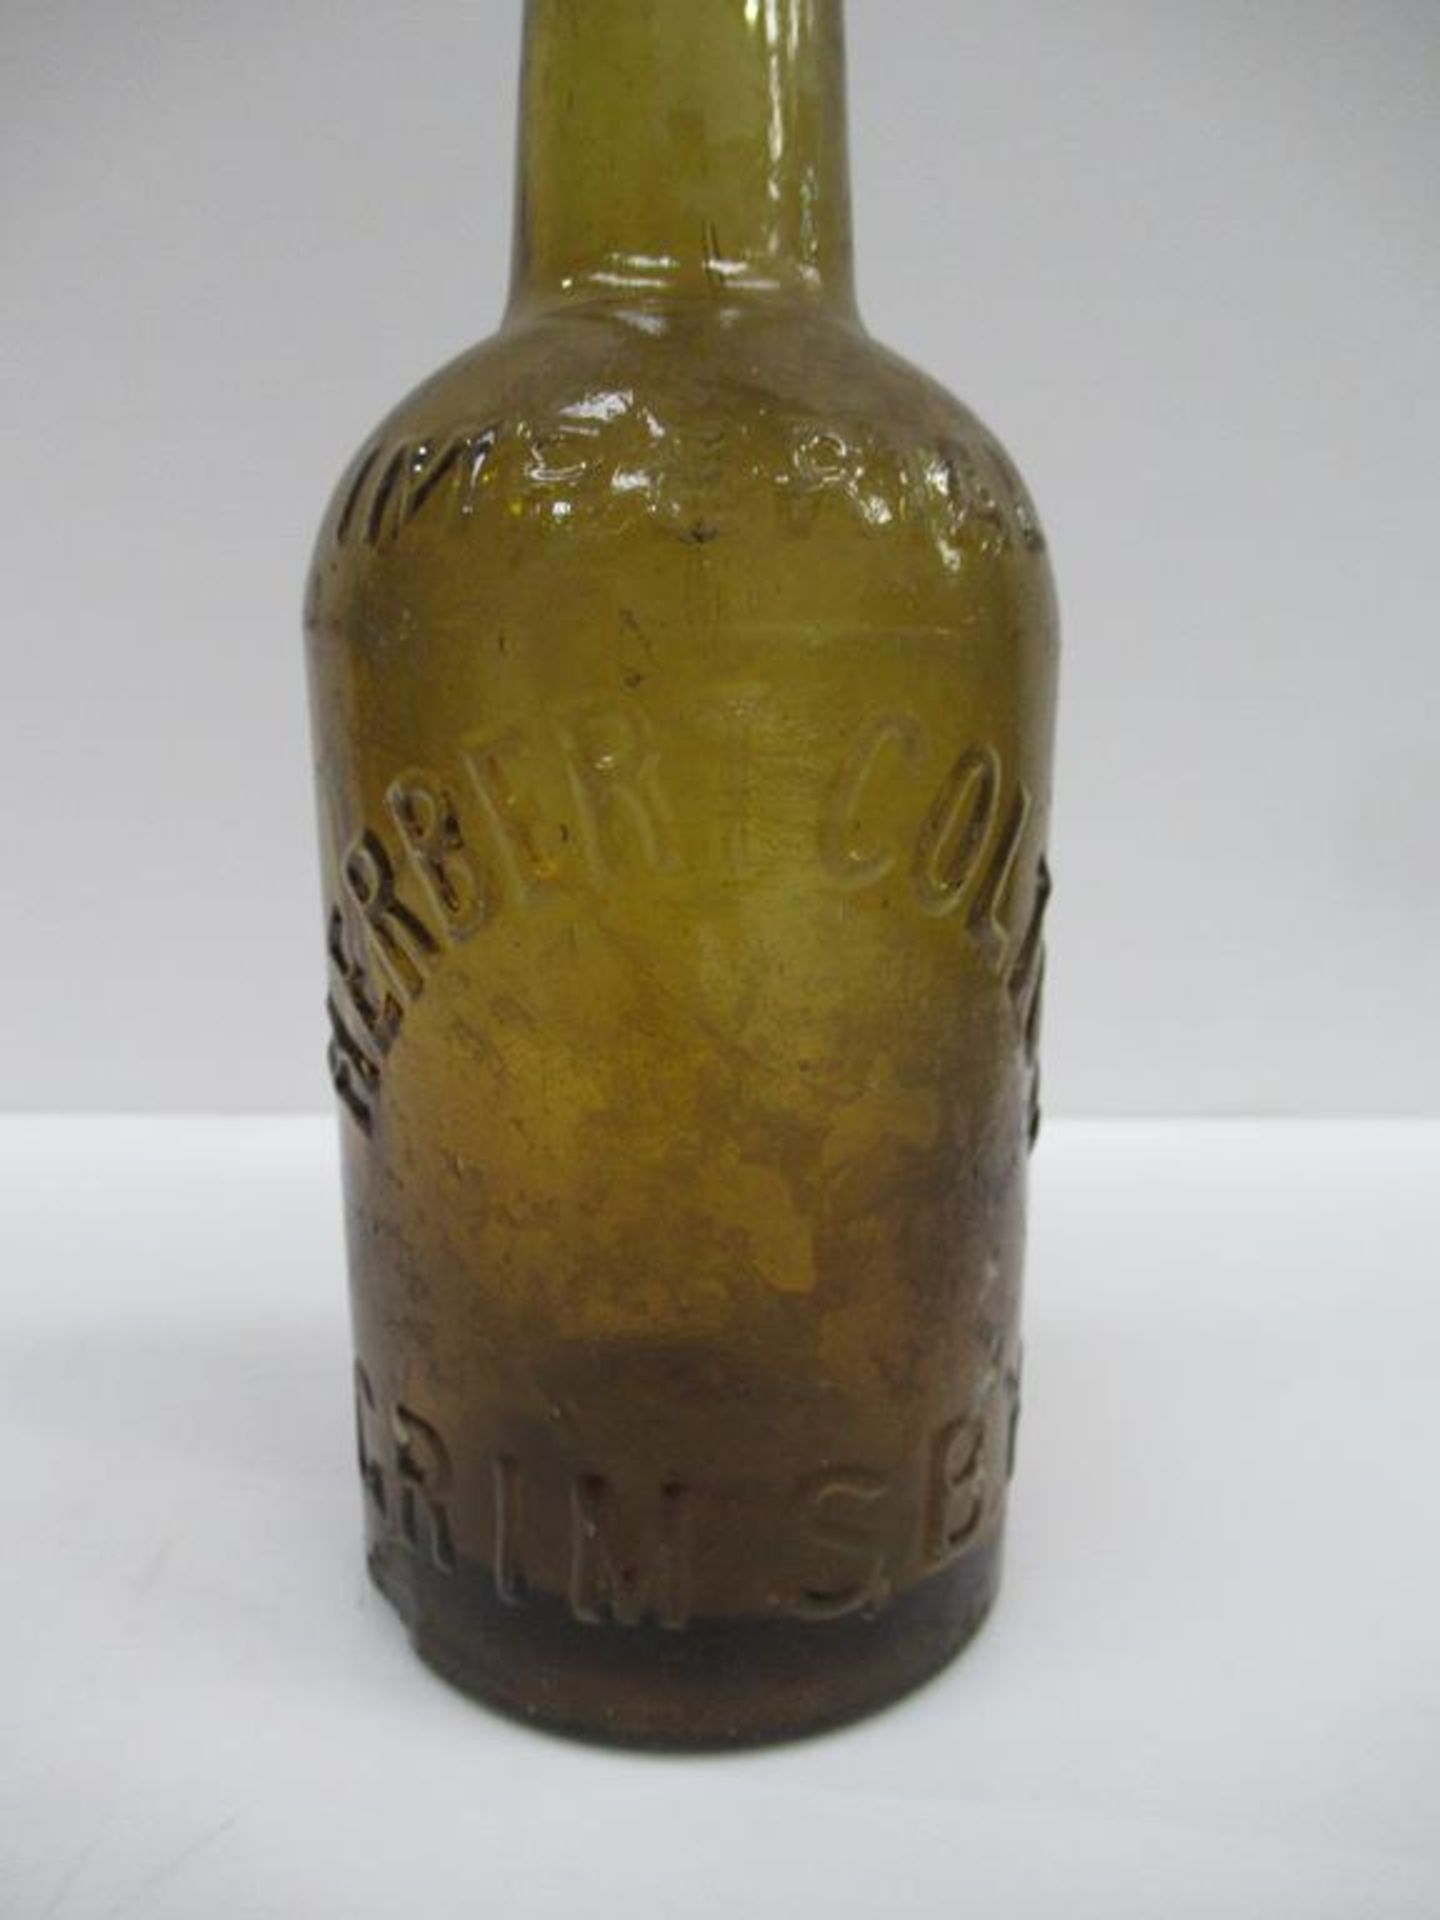 5x Grimsby Herbert Coulton (3) E.W Beckett & Co (1) and Beckett & Sons (1) bottles (4x coloured) - Image 19 of 20